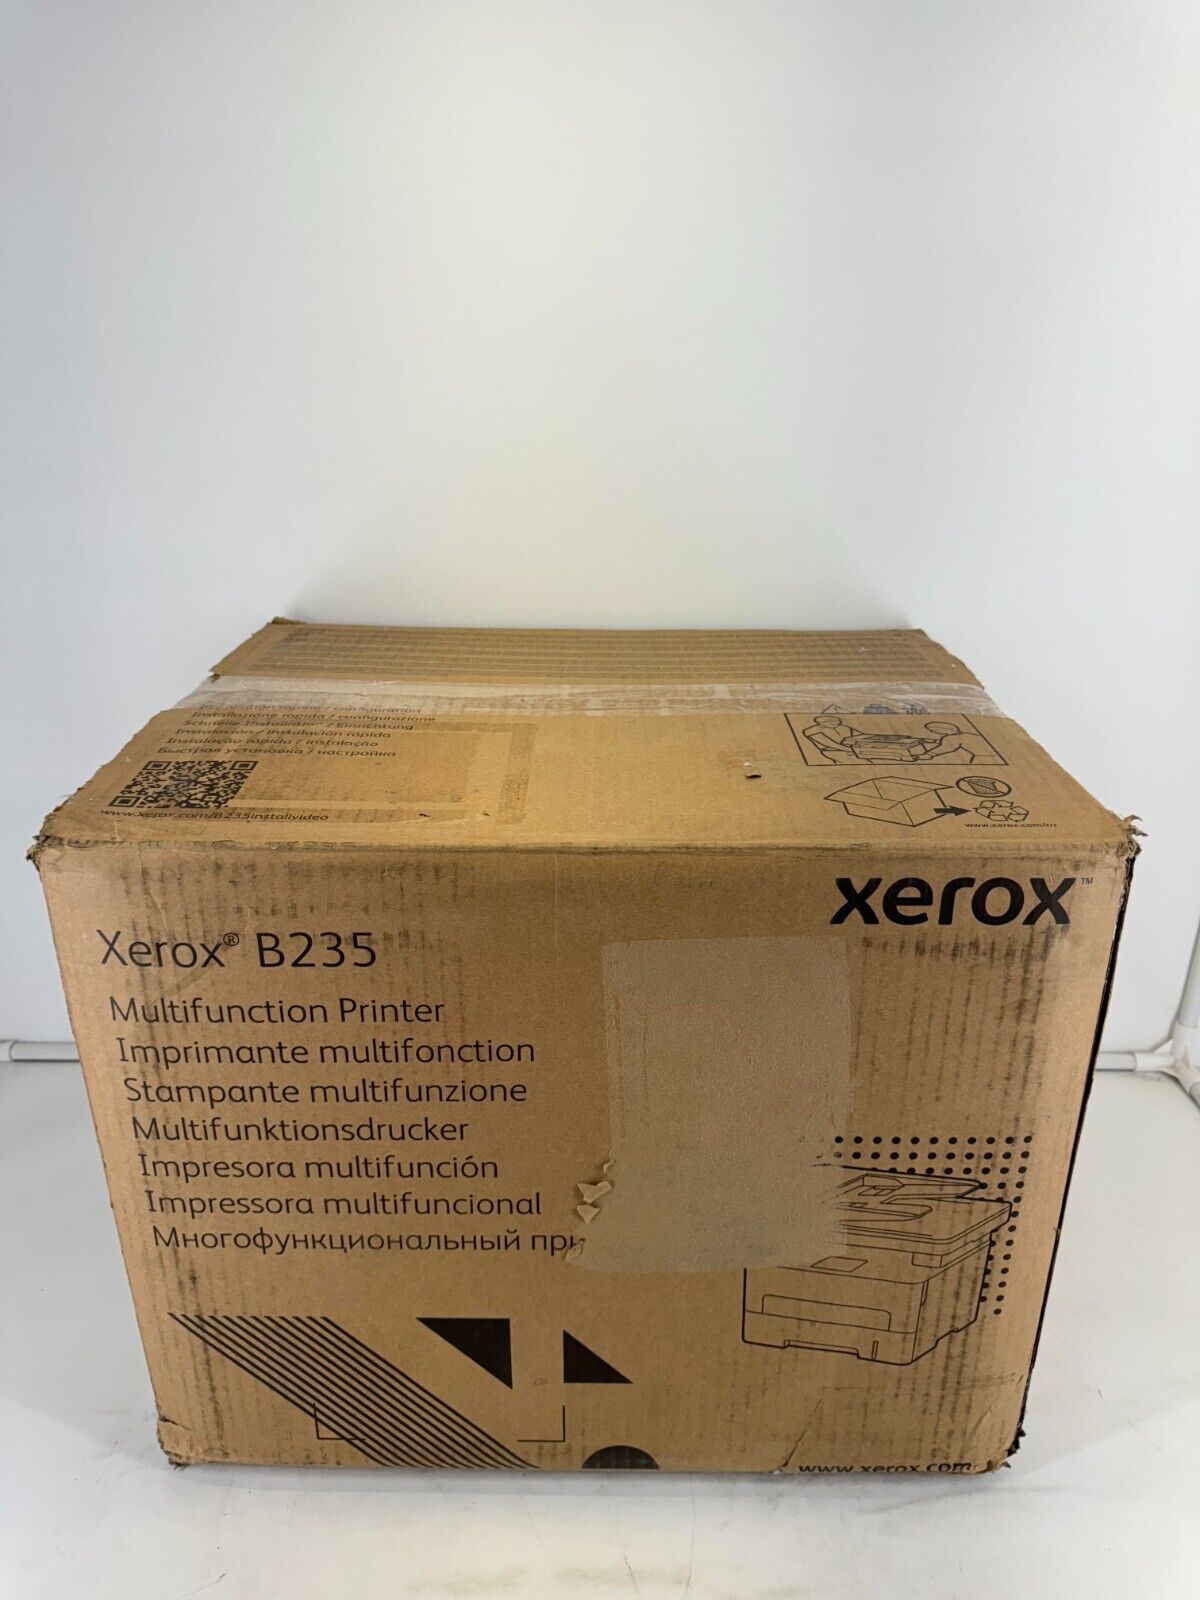 Xerox B235 Monochrome Laser All-in-One Printer B235/DNI - 3.4k Pages Printed